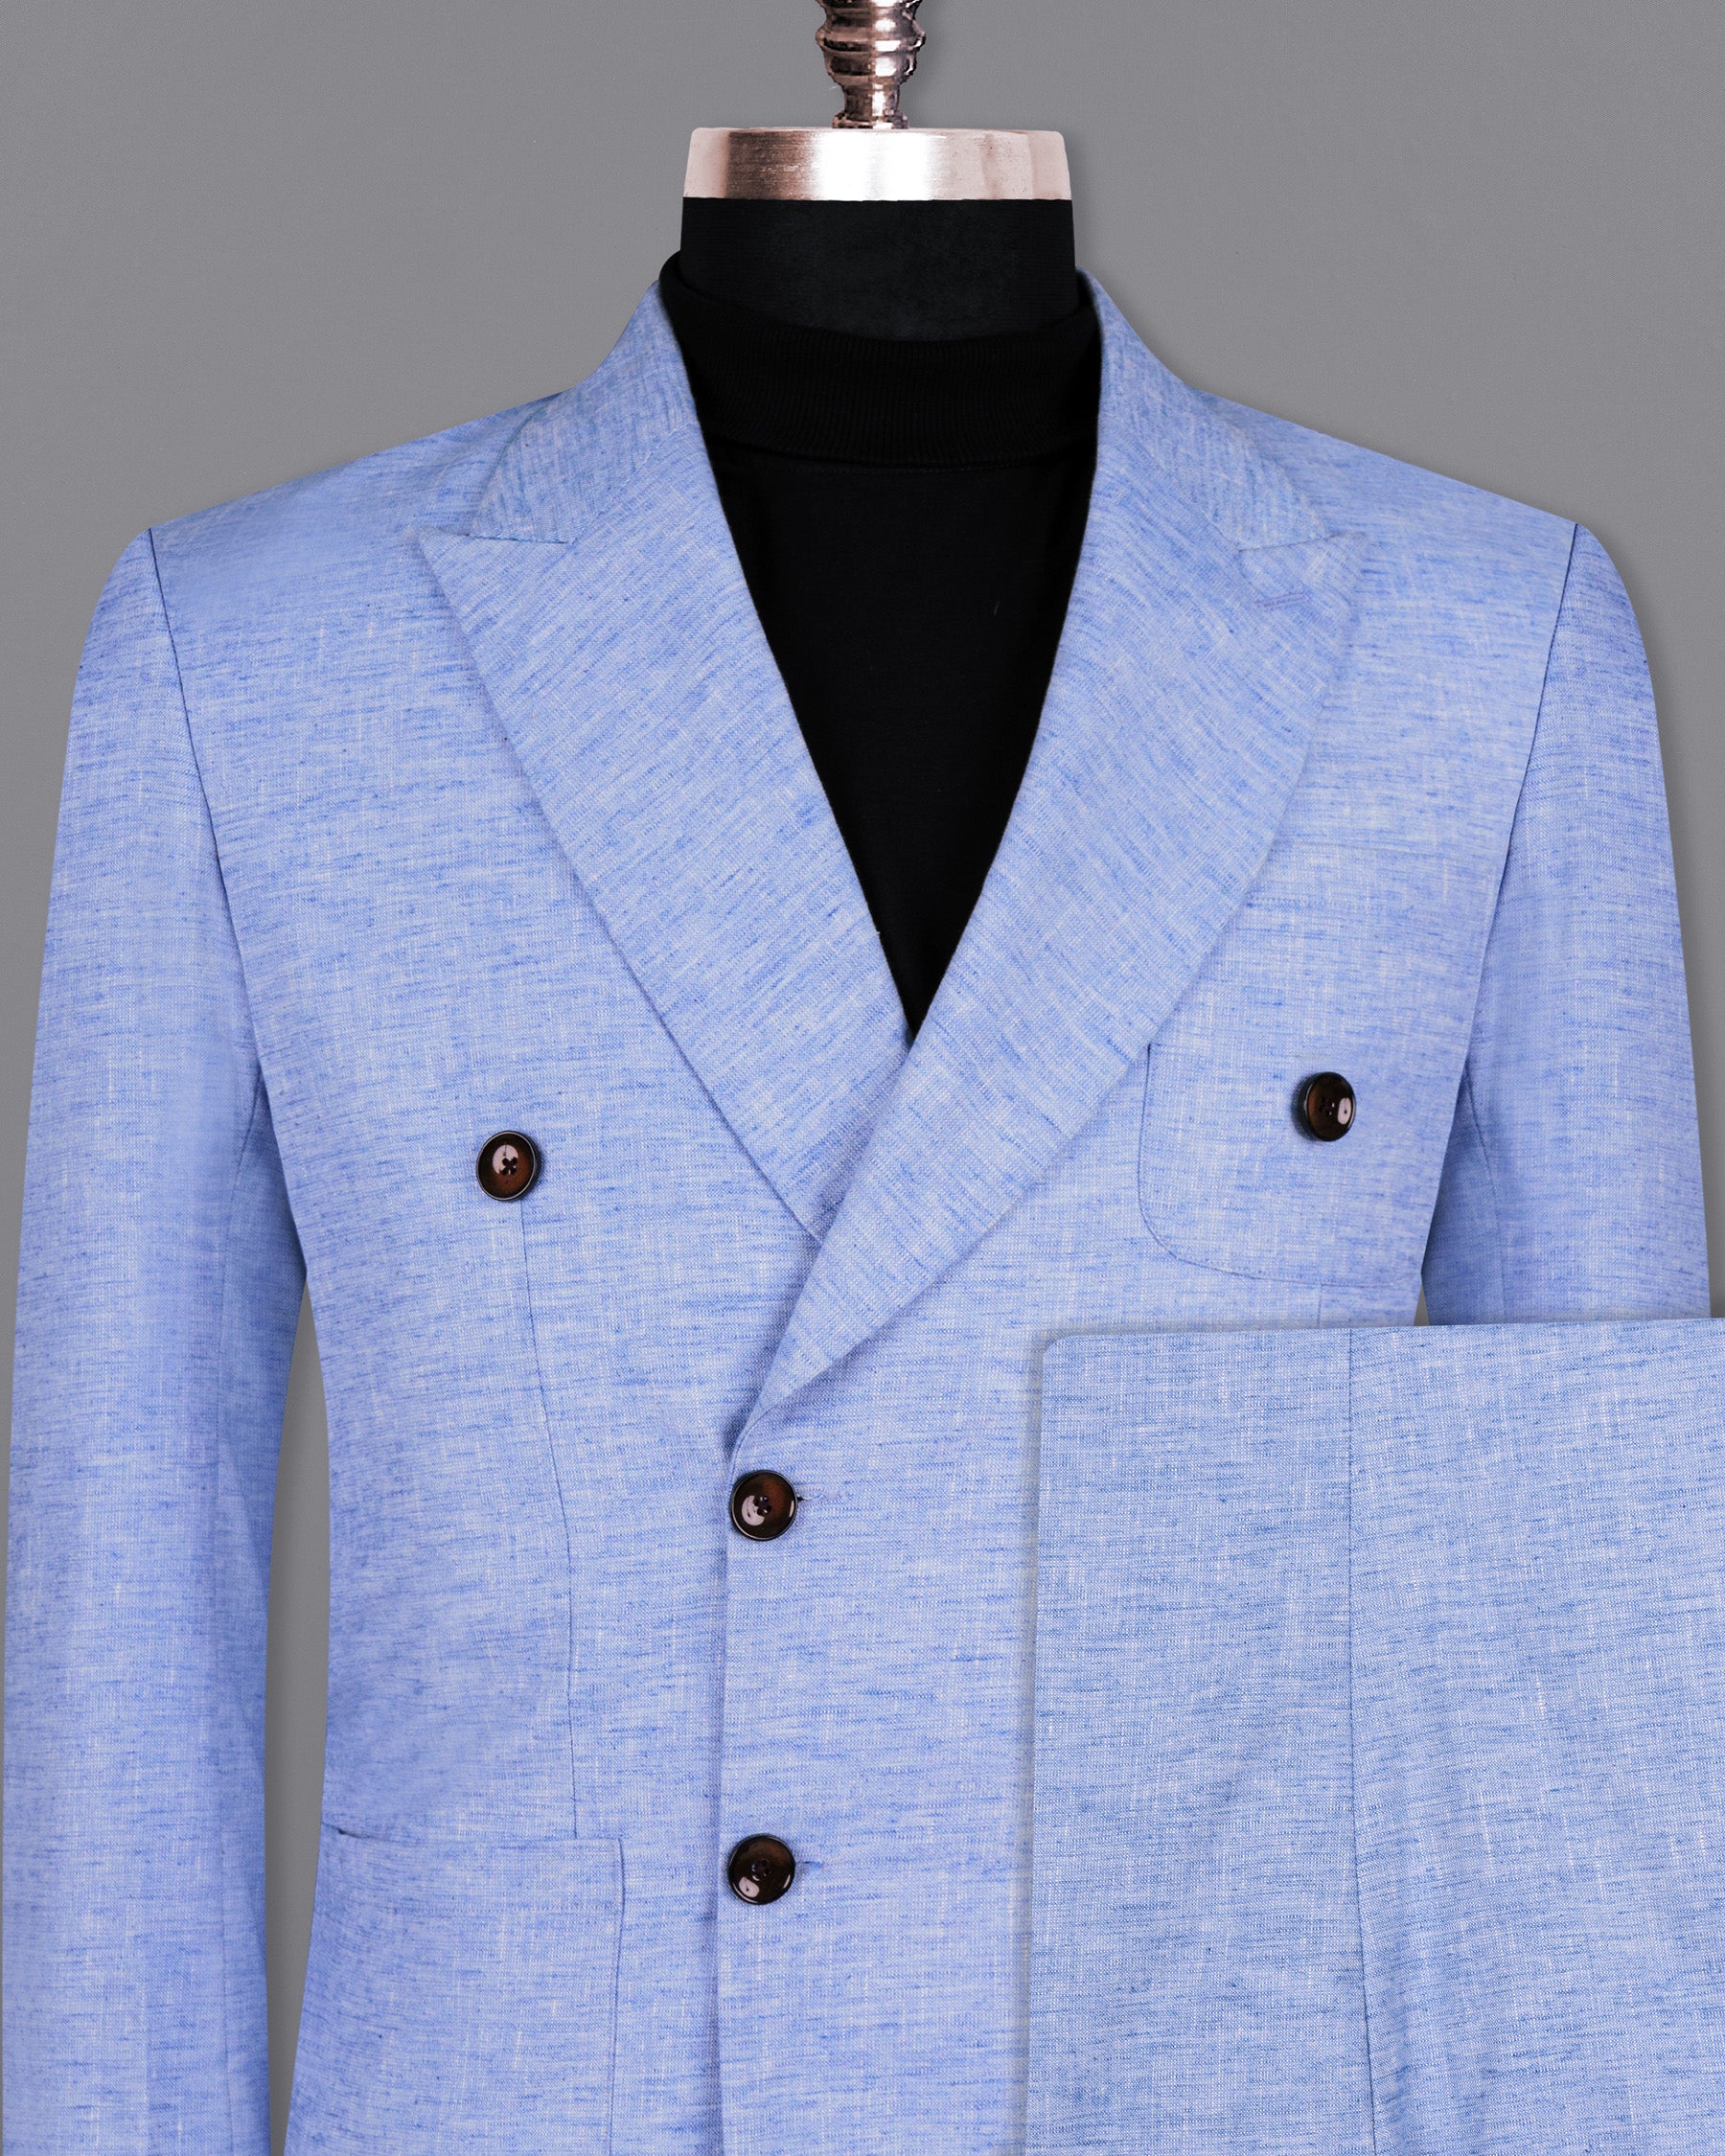 Ship Cove Blue Double Breasted Luxurious Linen Sports Suit ST1543-DB-PP-36, ST1543-DB-PP-38, ST1543-DB-PP-40, ST1543-DB-PP-42, ST1543-DB-PP-44, ST1543-DB-PP-46, ST1543-DB-PP-48, ST1543-DB-PP-50, ST1543-DB-PP-52, ST1543-DB-PP-54, ST1543-DB-PP-56, ST1543-DB-PP-58, ST1543-DB-PP-60